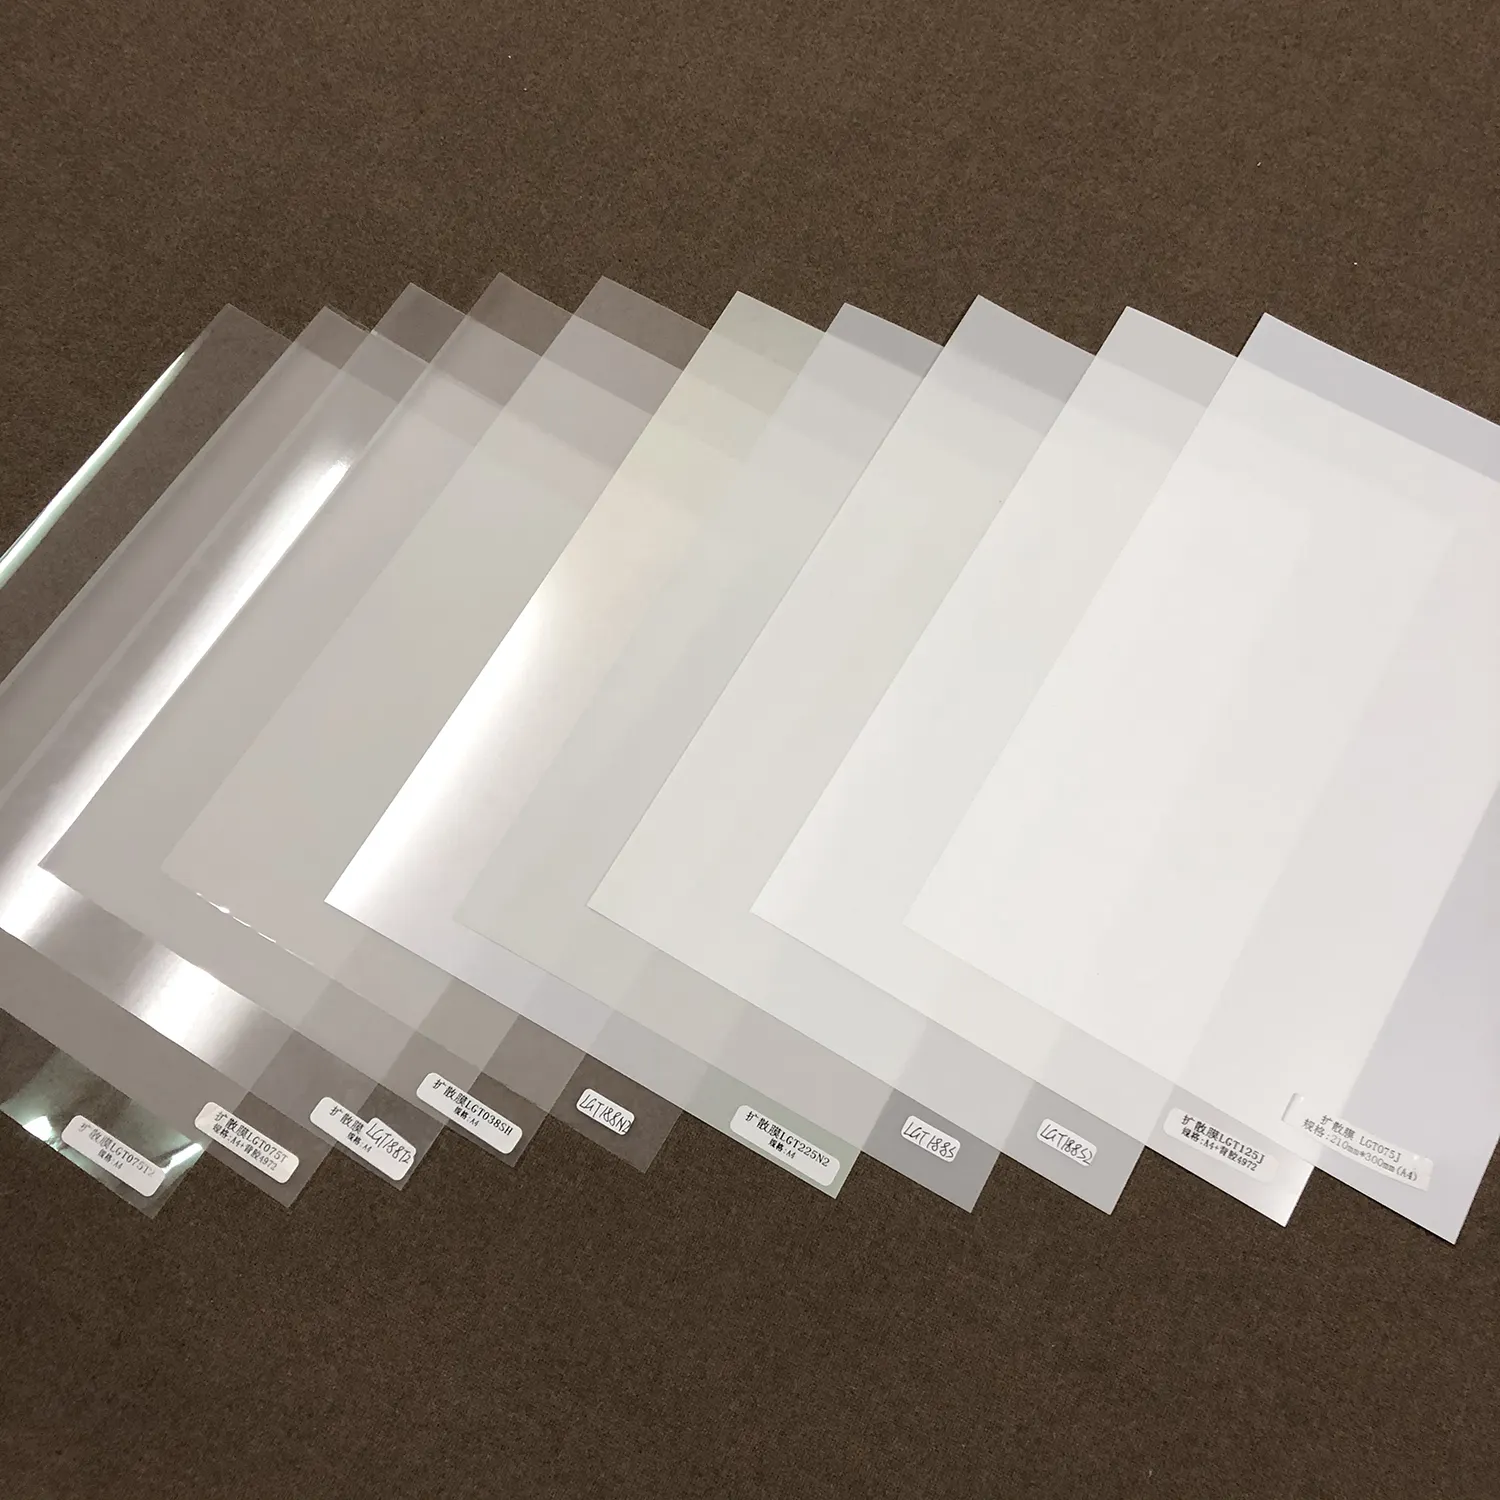 Pelicula difusora PET LGT075T2 Diffuser Film For backlight of Computer TV and other electronic products